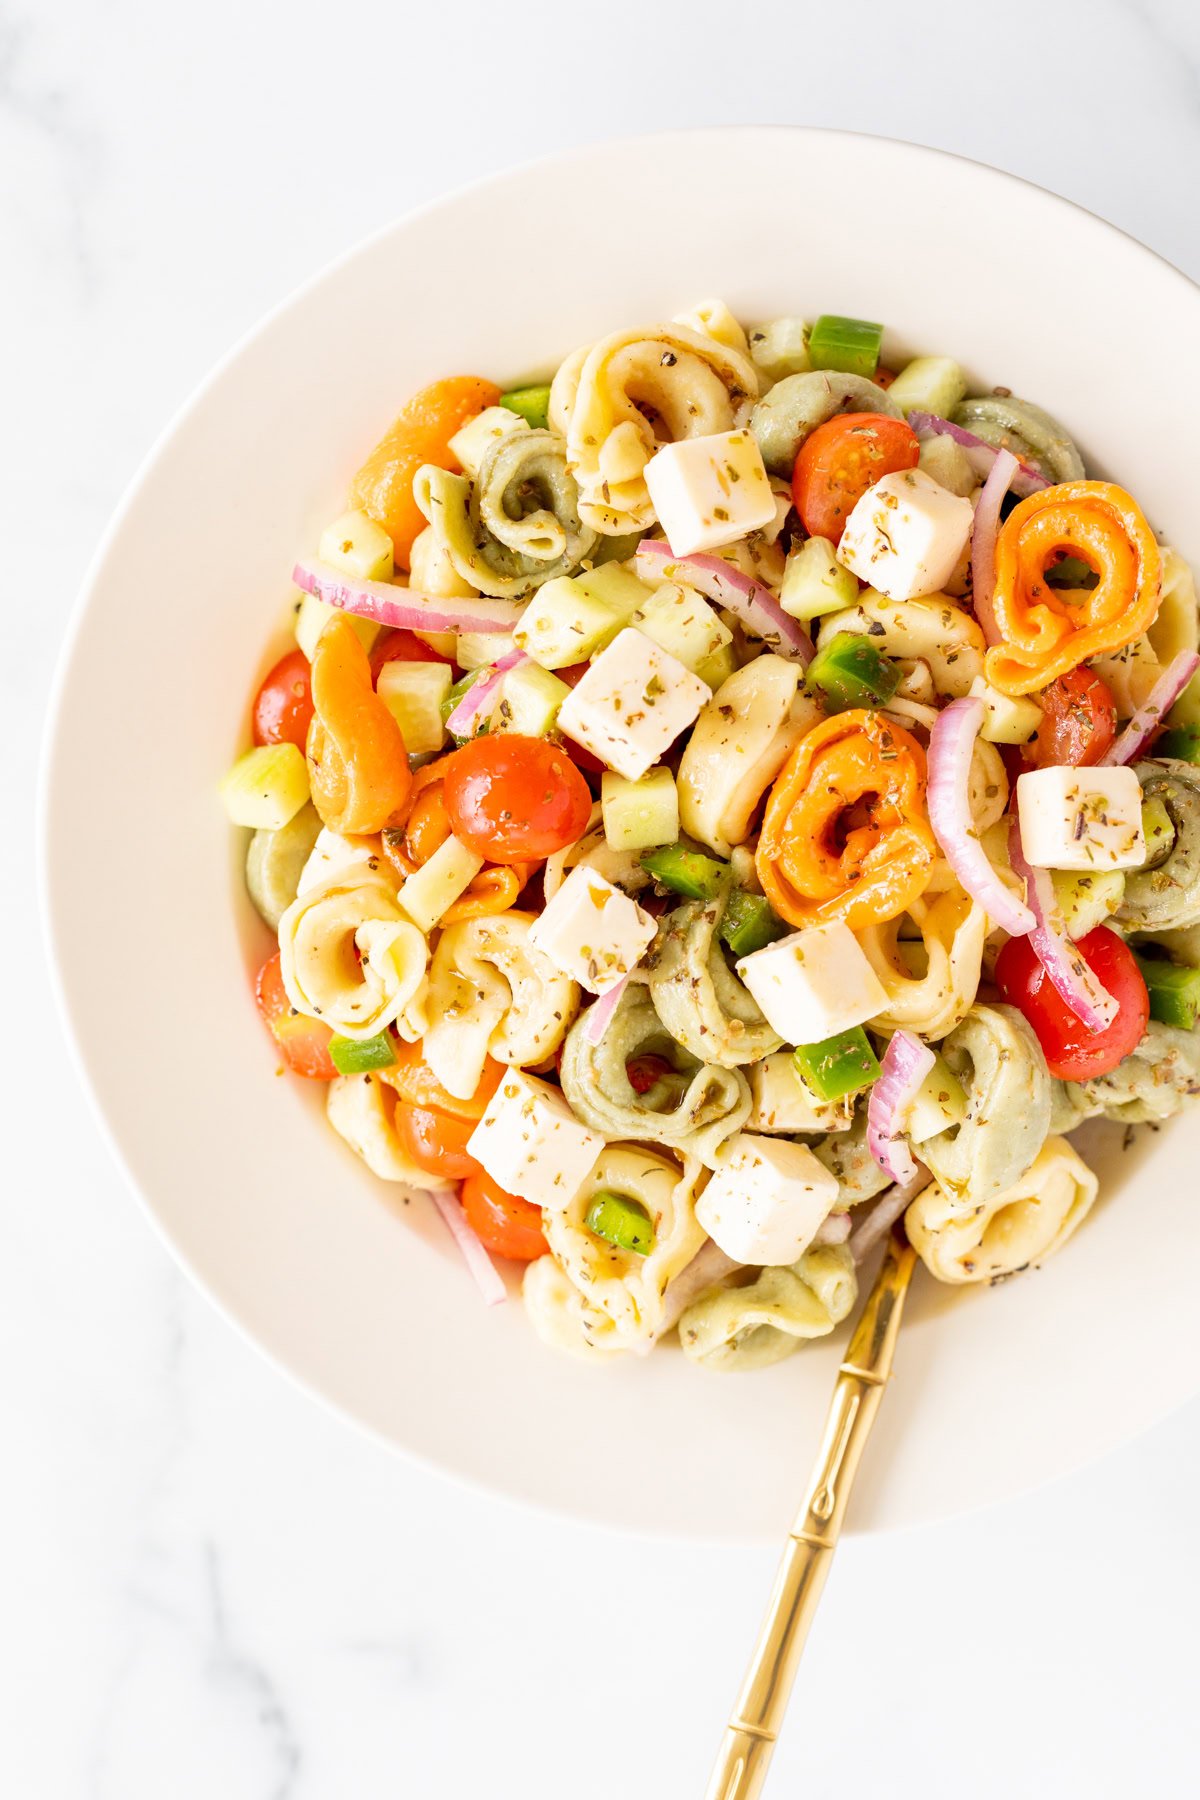 A white bowl filled with pasta salad containing tortellini, cubed cheese, cherry tomatoes, diced cucumbers, red onions, and bell peppers—perfect as one of your pulled pork sides. A gold fork rests on the side.